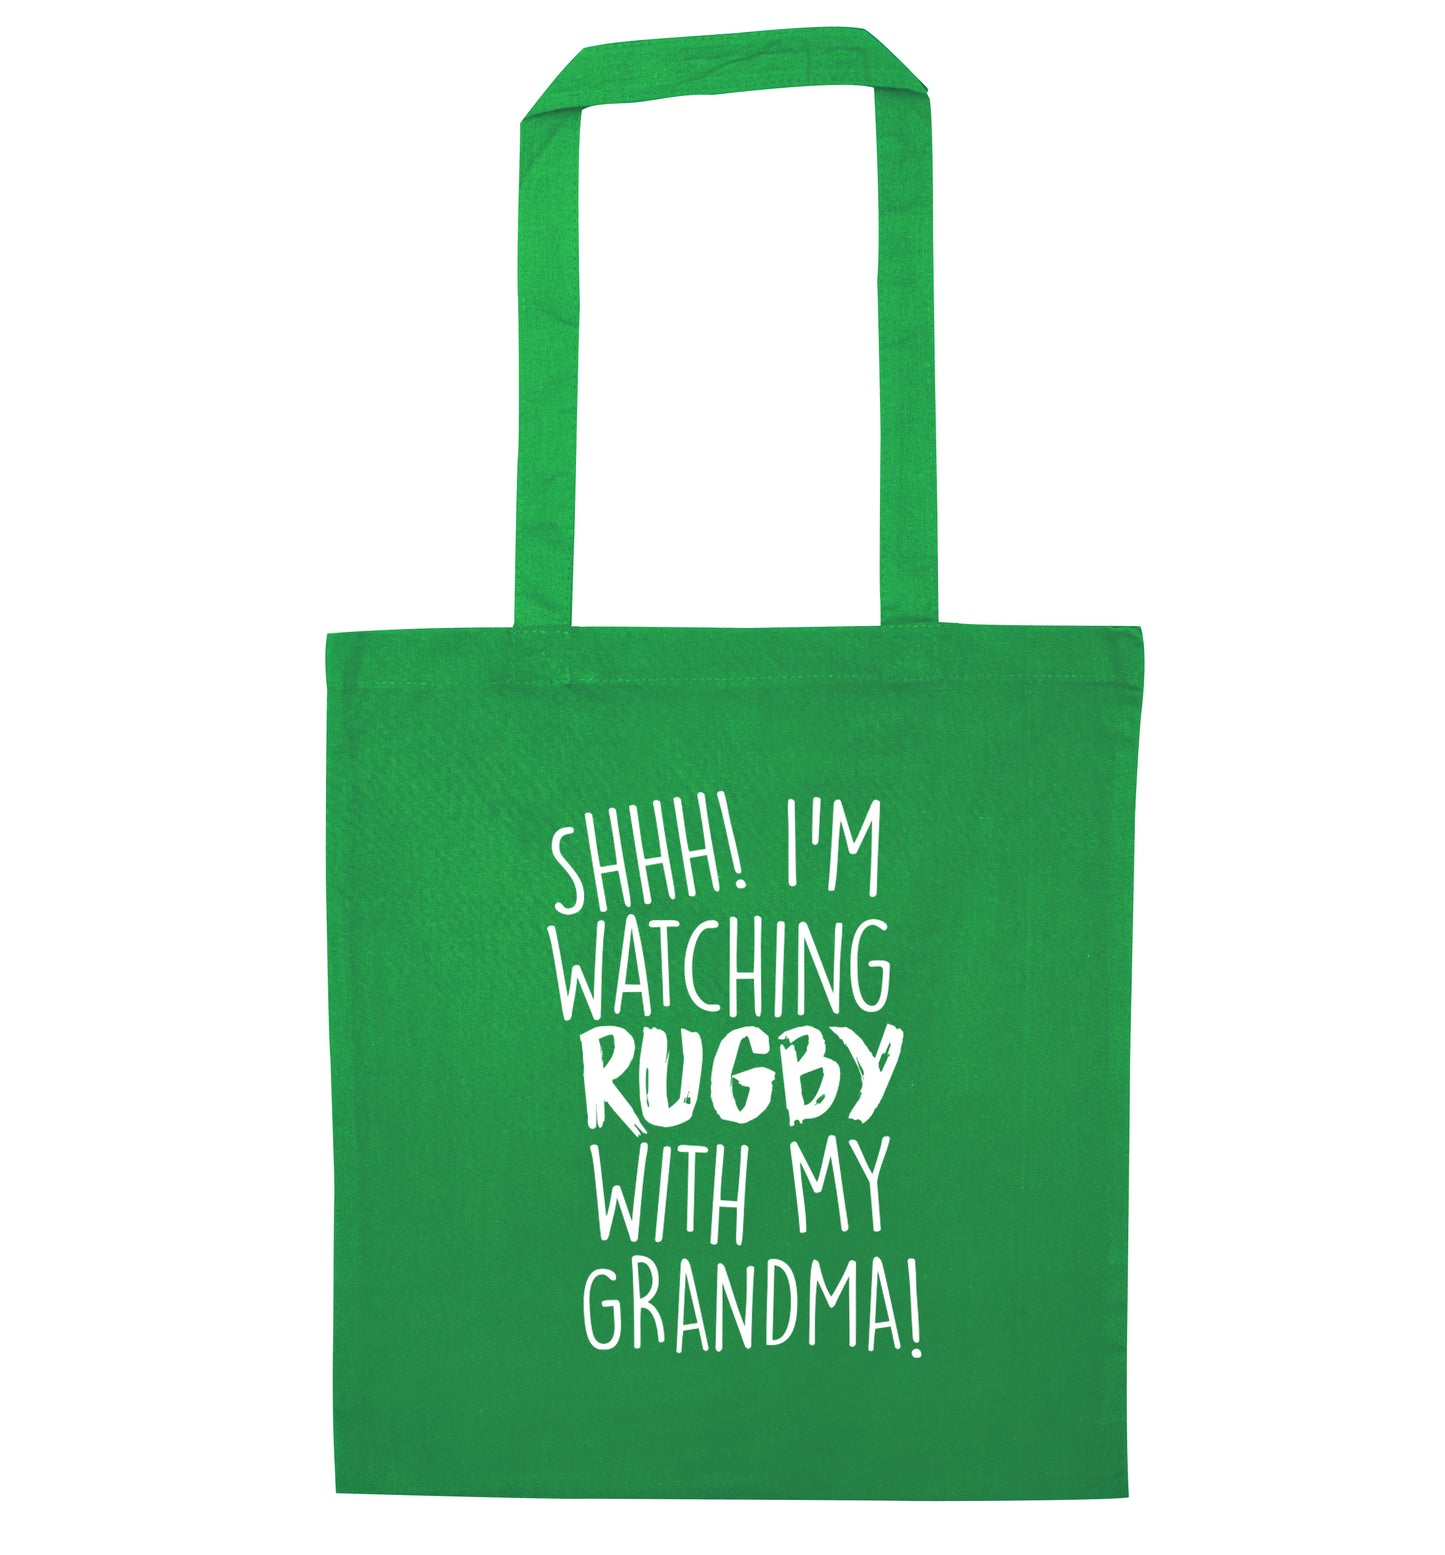 Shh I'm watching rugby with my grandma green tote bag